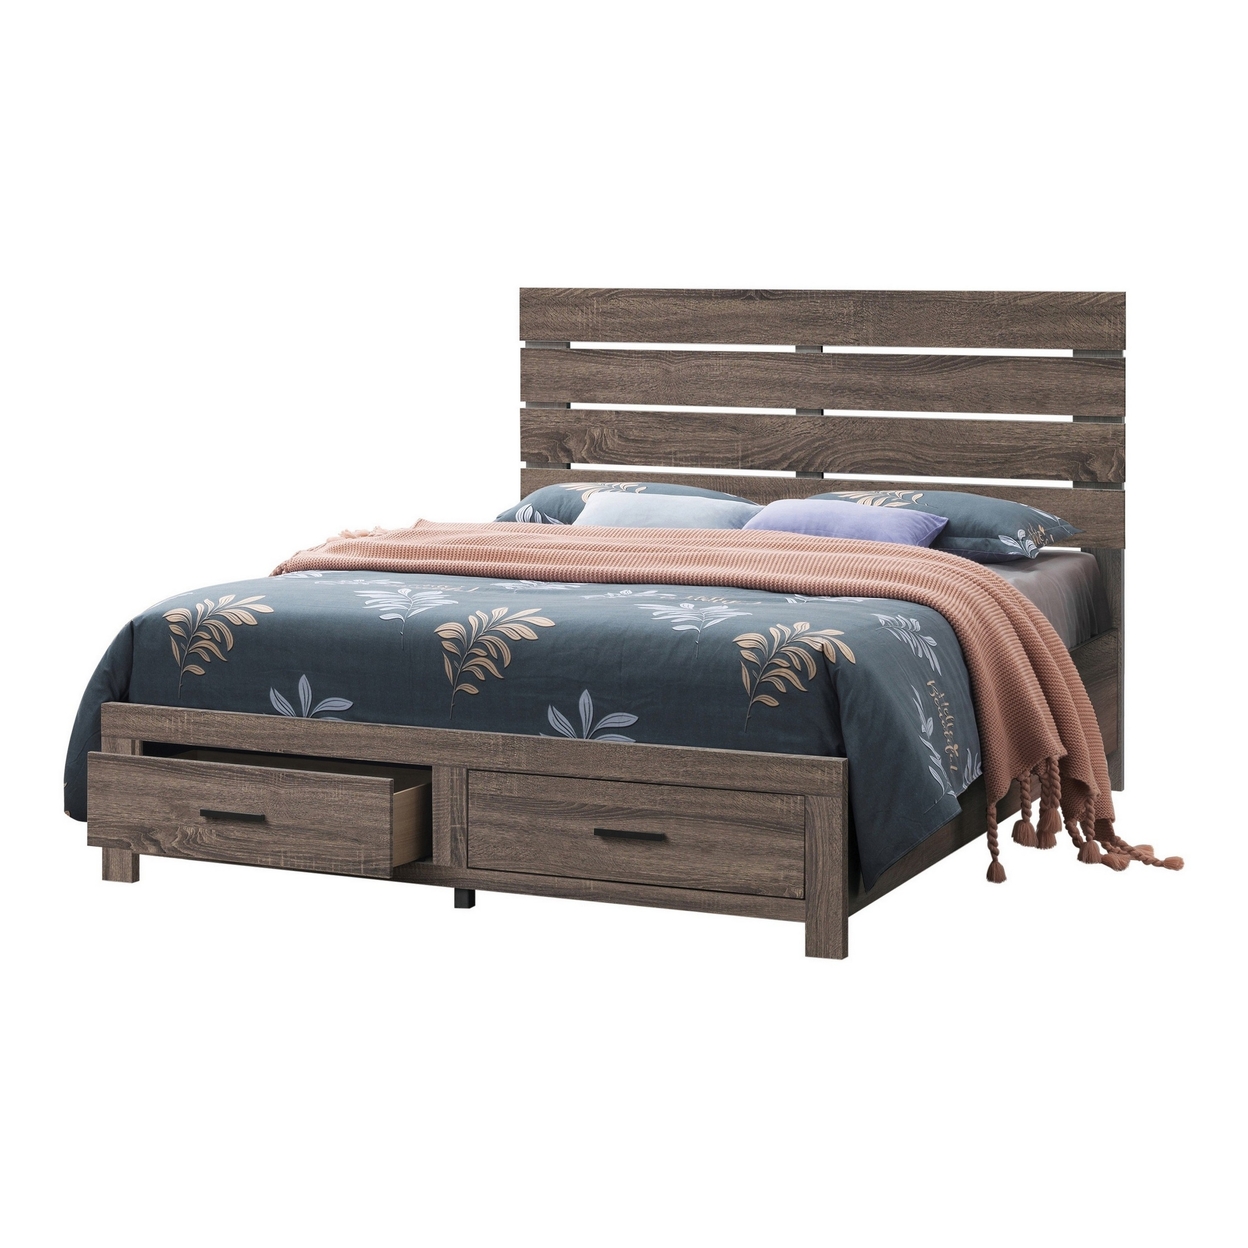 Ach Wood Queen Storage Bed With 2 Drawers, Plank Style Headboard, Brown- Saltoro Sherpi